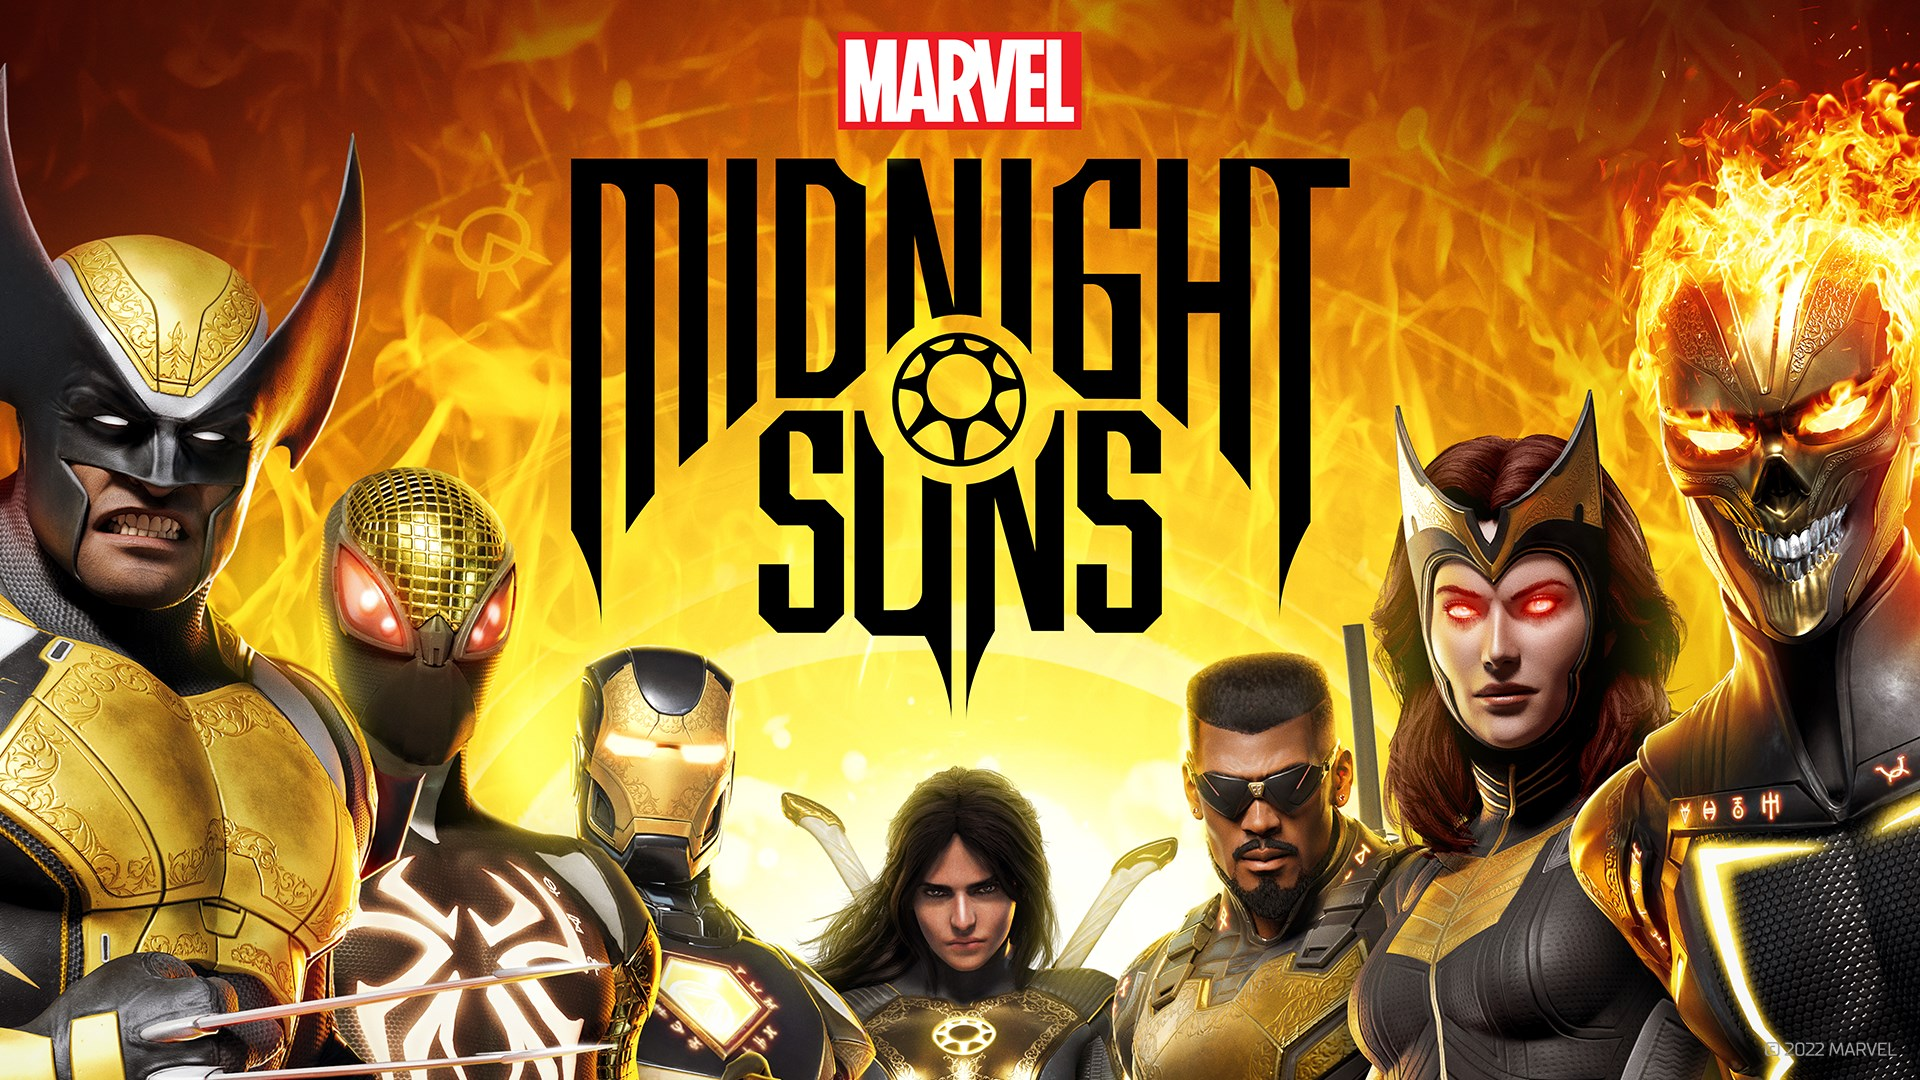 Marvel's Midnight Suns Trophy Guide & How to Get Platinum